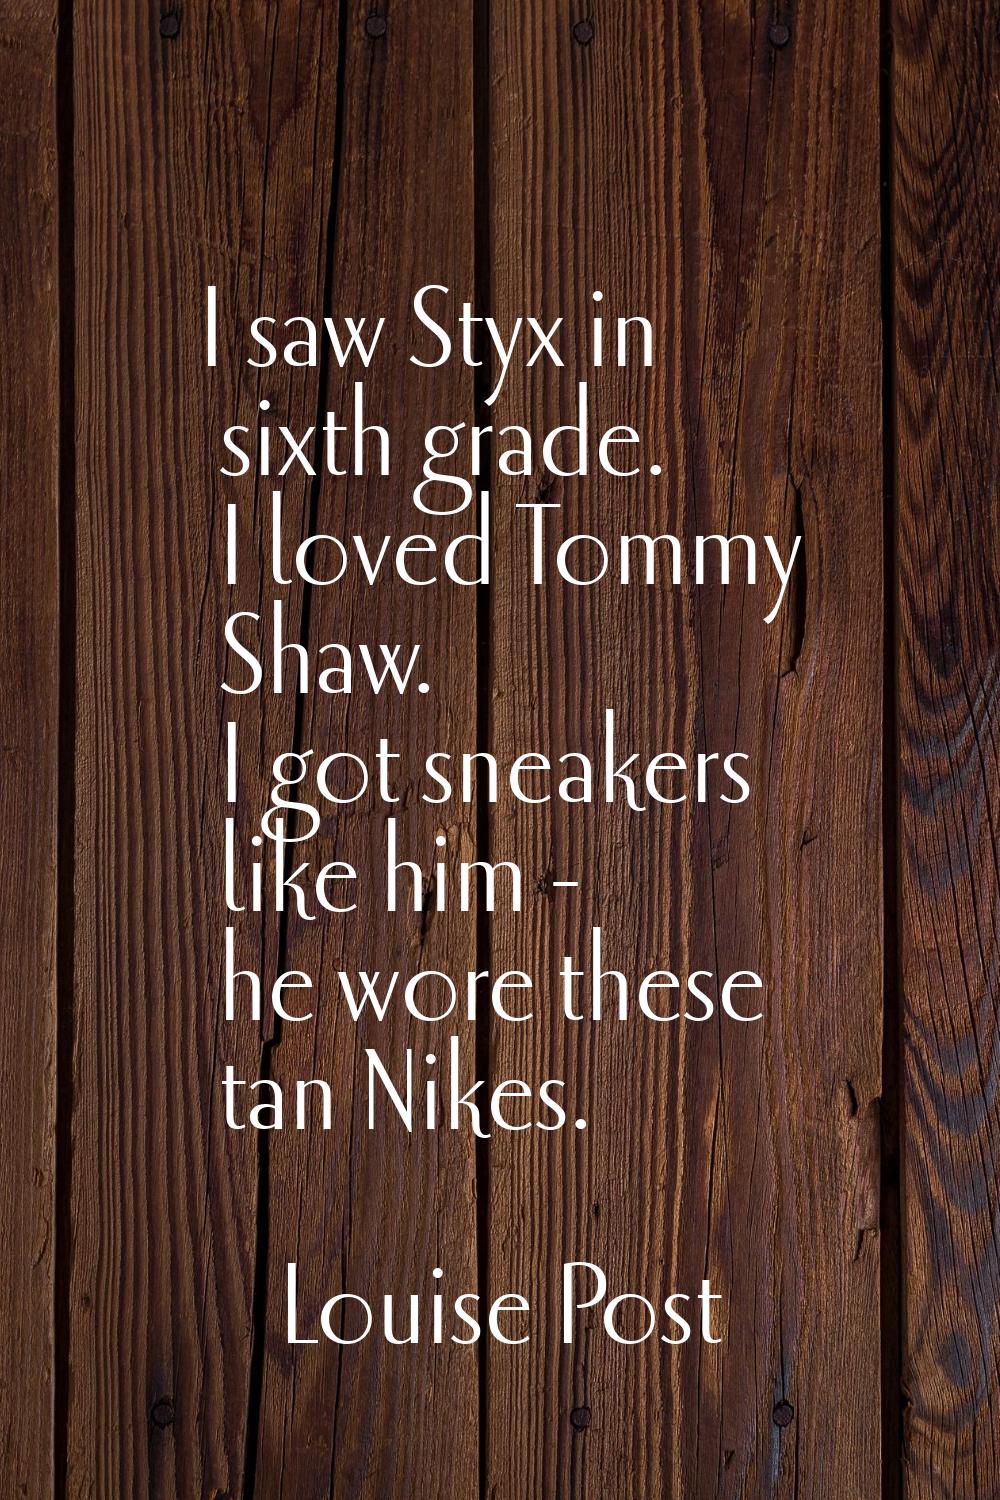 I saw Styx in sixth grade. I loved Tommy Shaw. I got sneakers like him - he wore these tan Nikes.